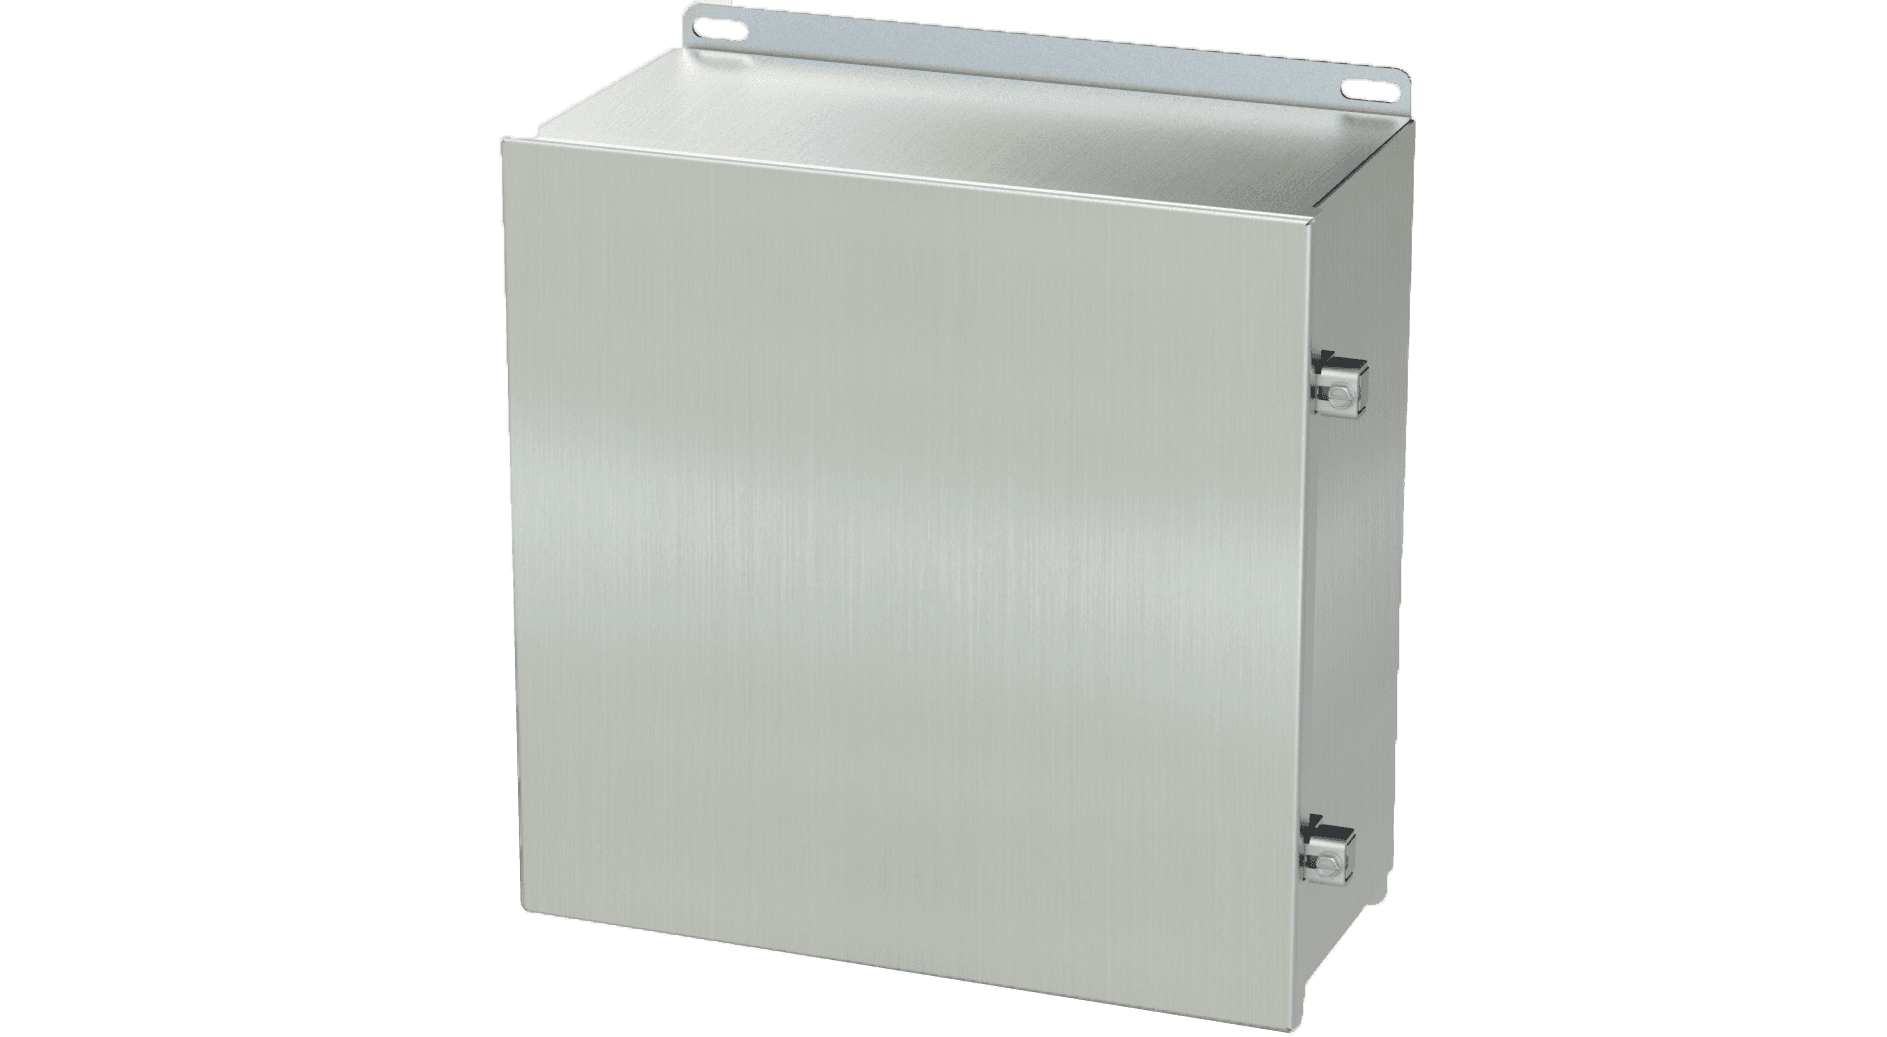 Saginaw Control SCE-1212CHNFSS S.S. CHNF Enclosure, Height:12.13", Width:12.00", Depth:6.00", #4 brushed finish on all exterior surfaces. Optional sub-panels are powder coated white.